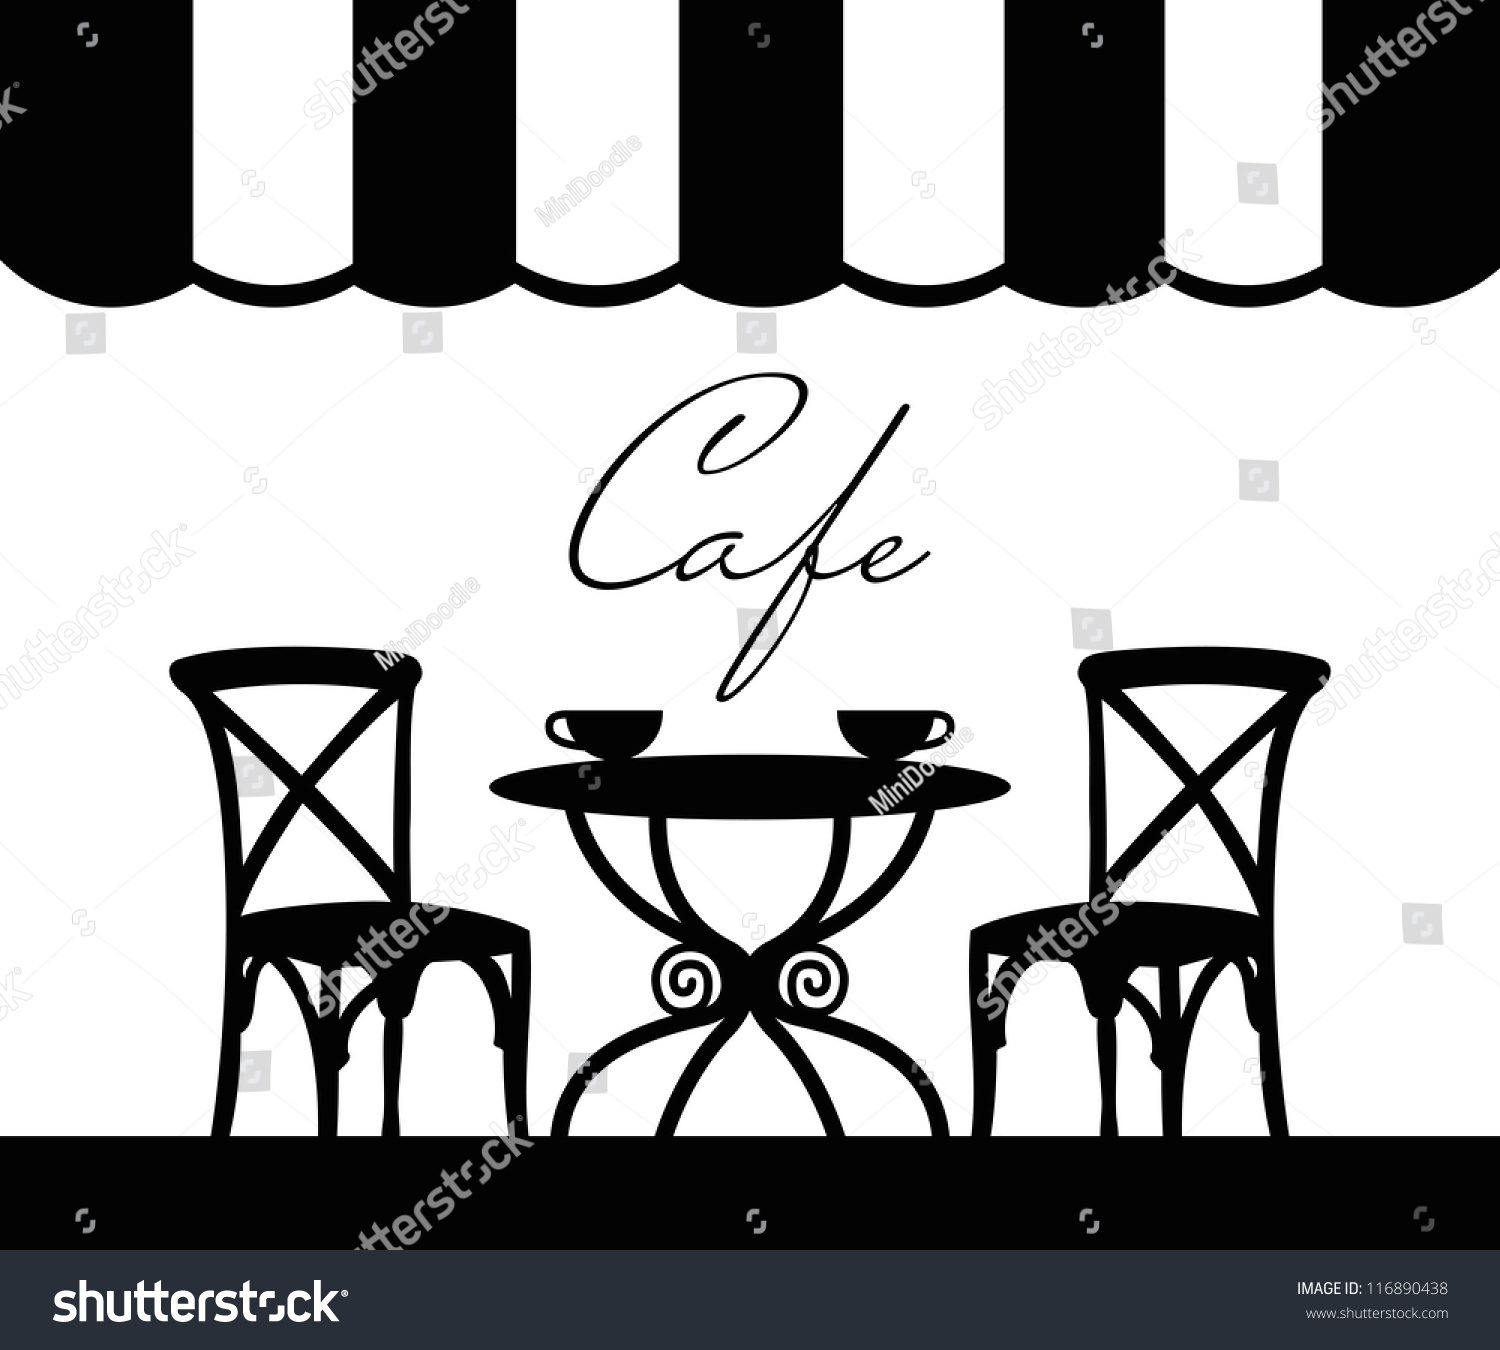 cafe clipart images - photo #47